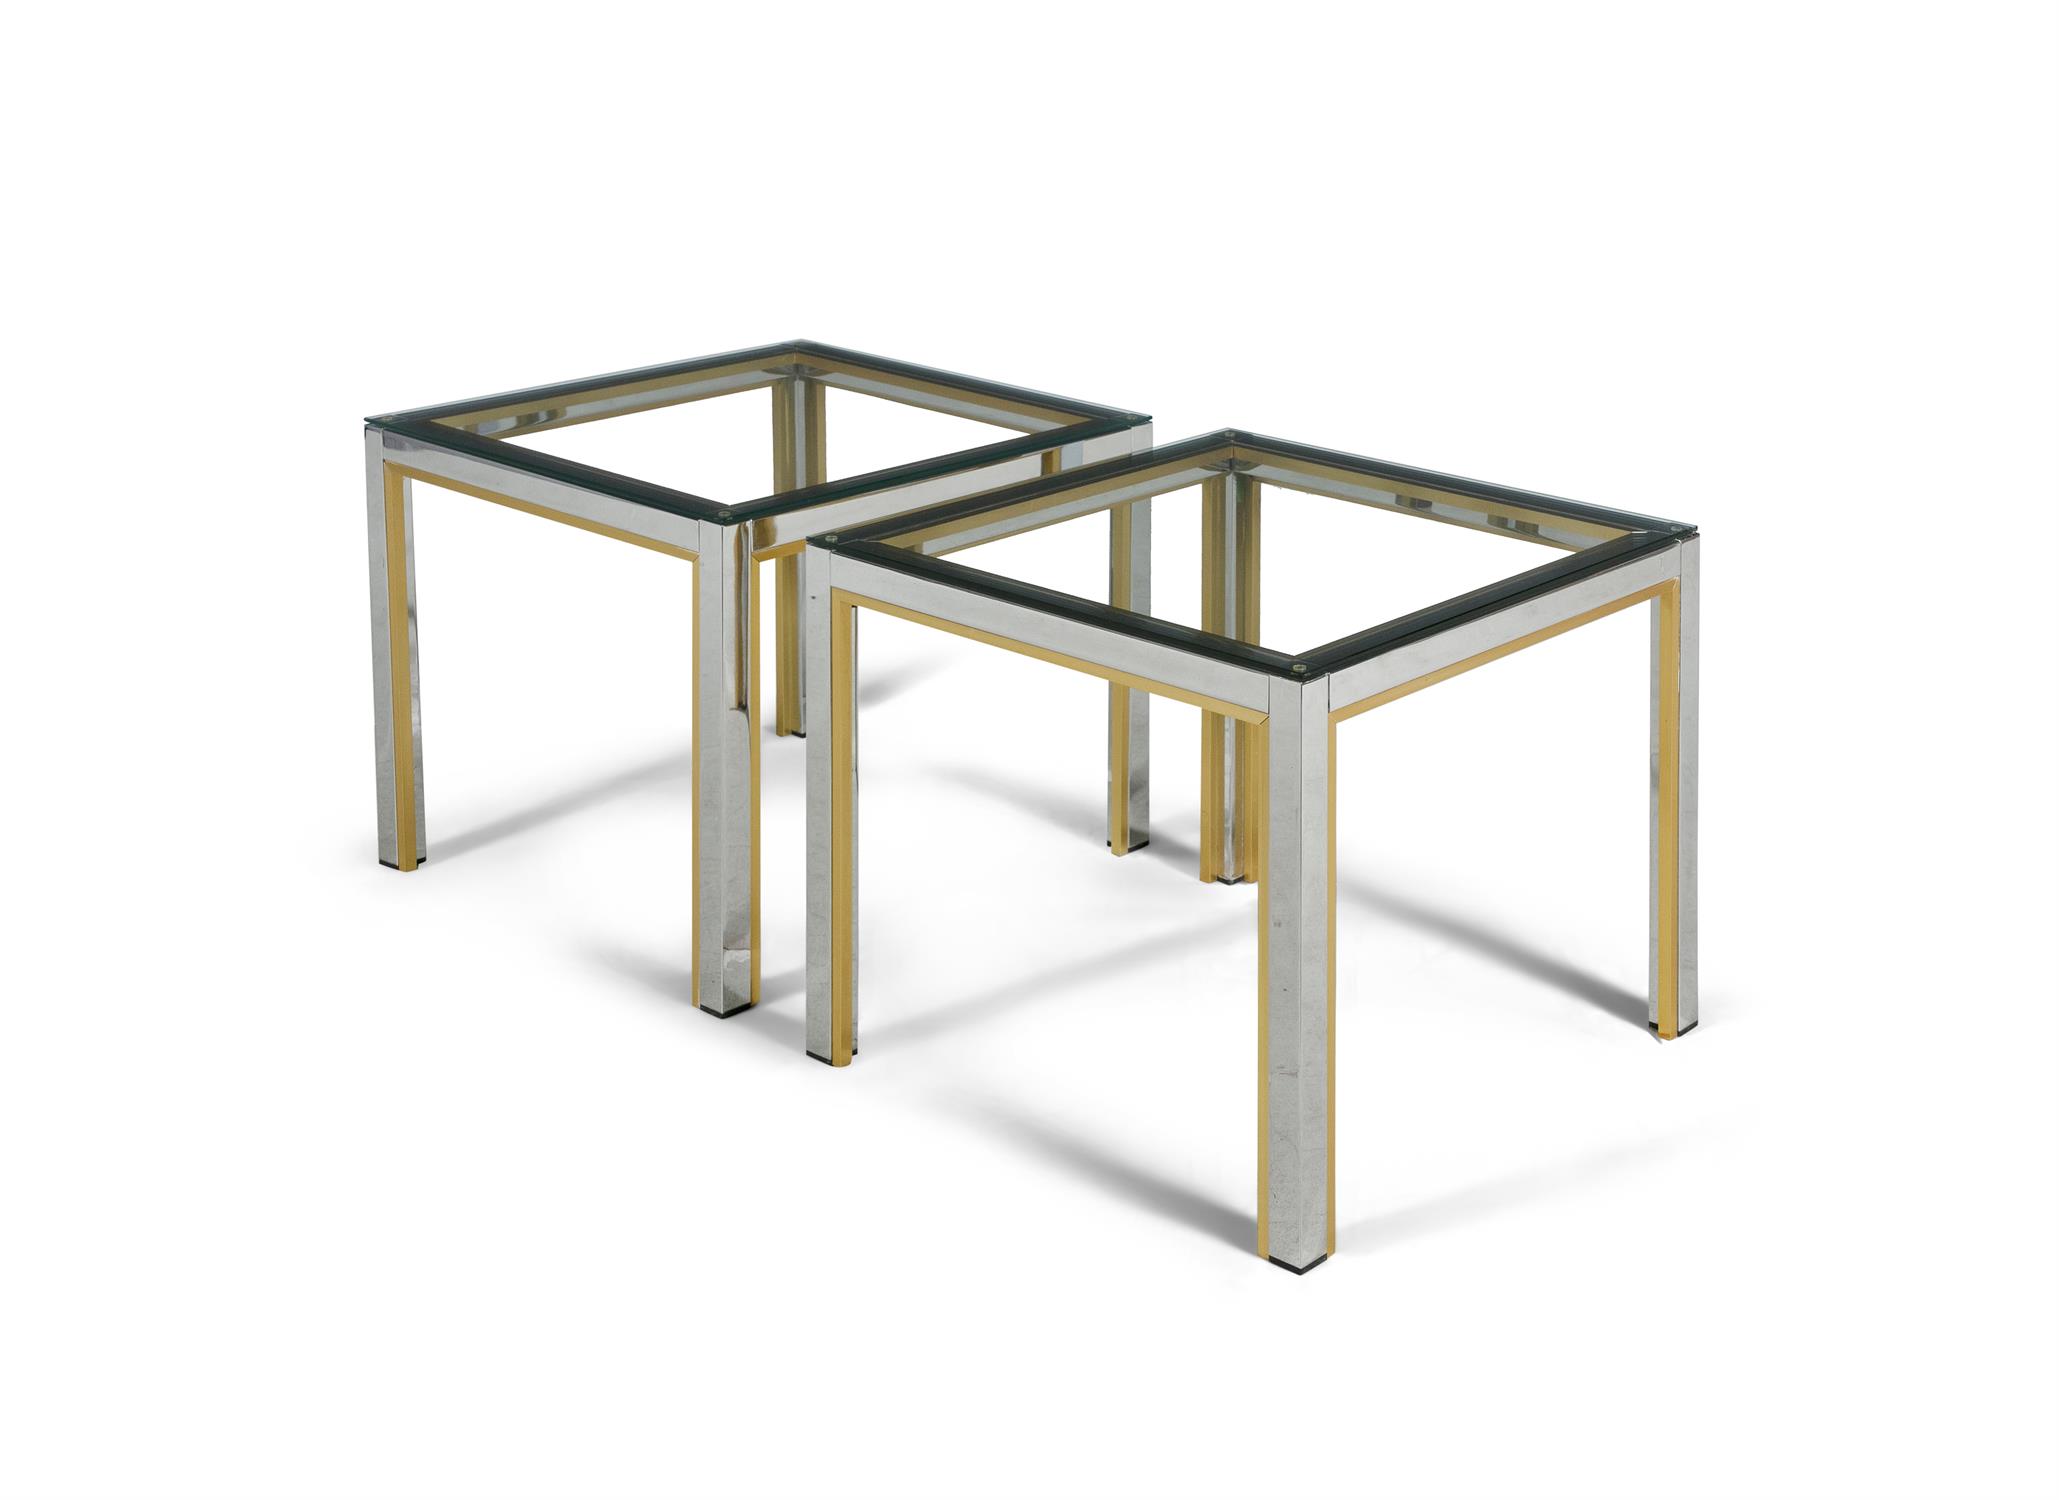 TABLES A pair of chrome and brass tables, attributed to Renato Zevi for Romeo Rega, with glass tops. - Image 4 of 4